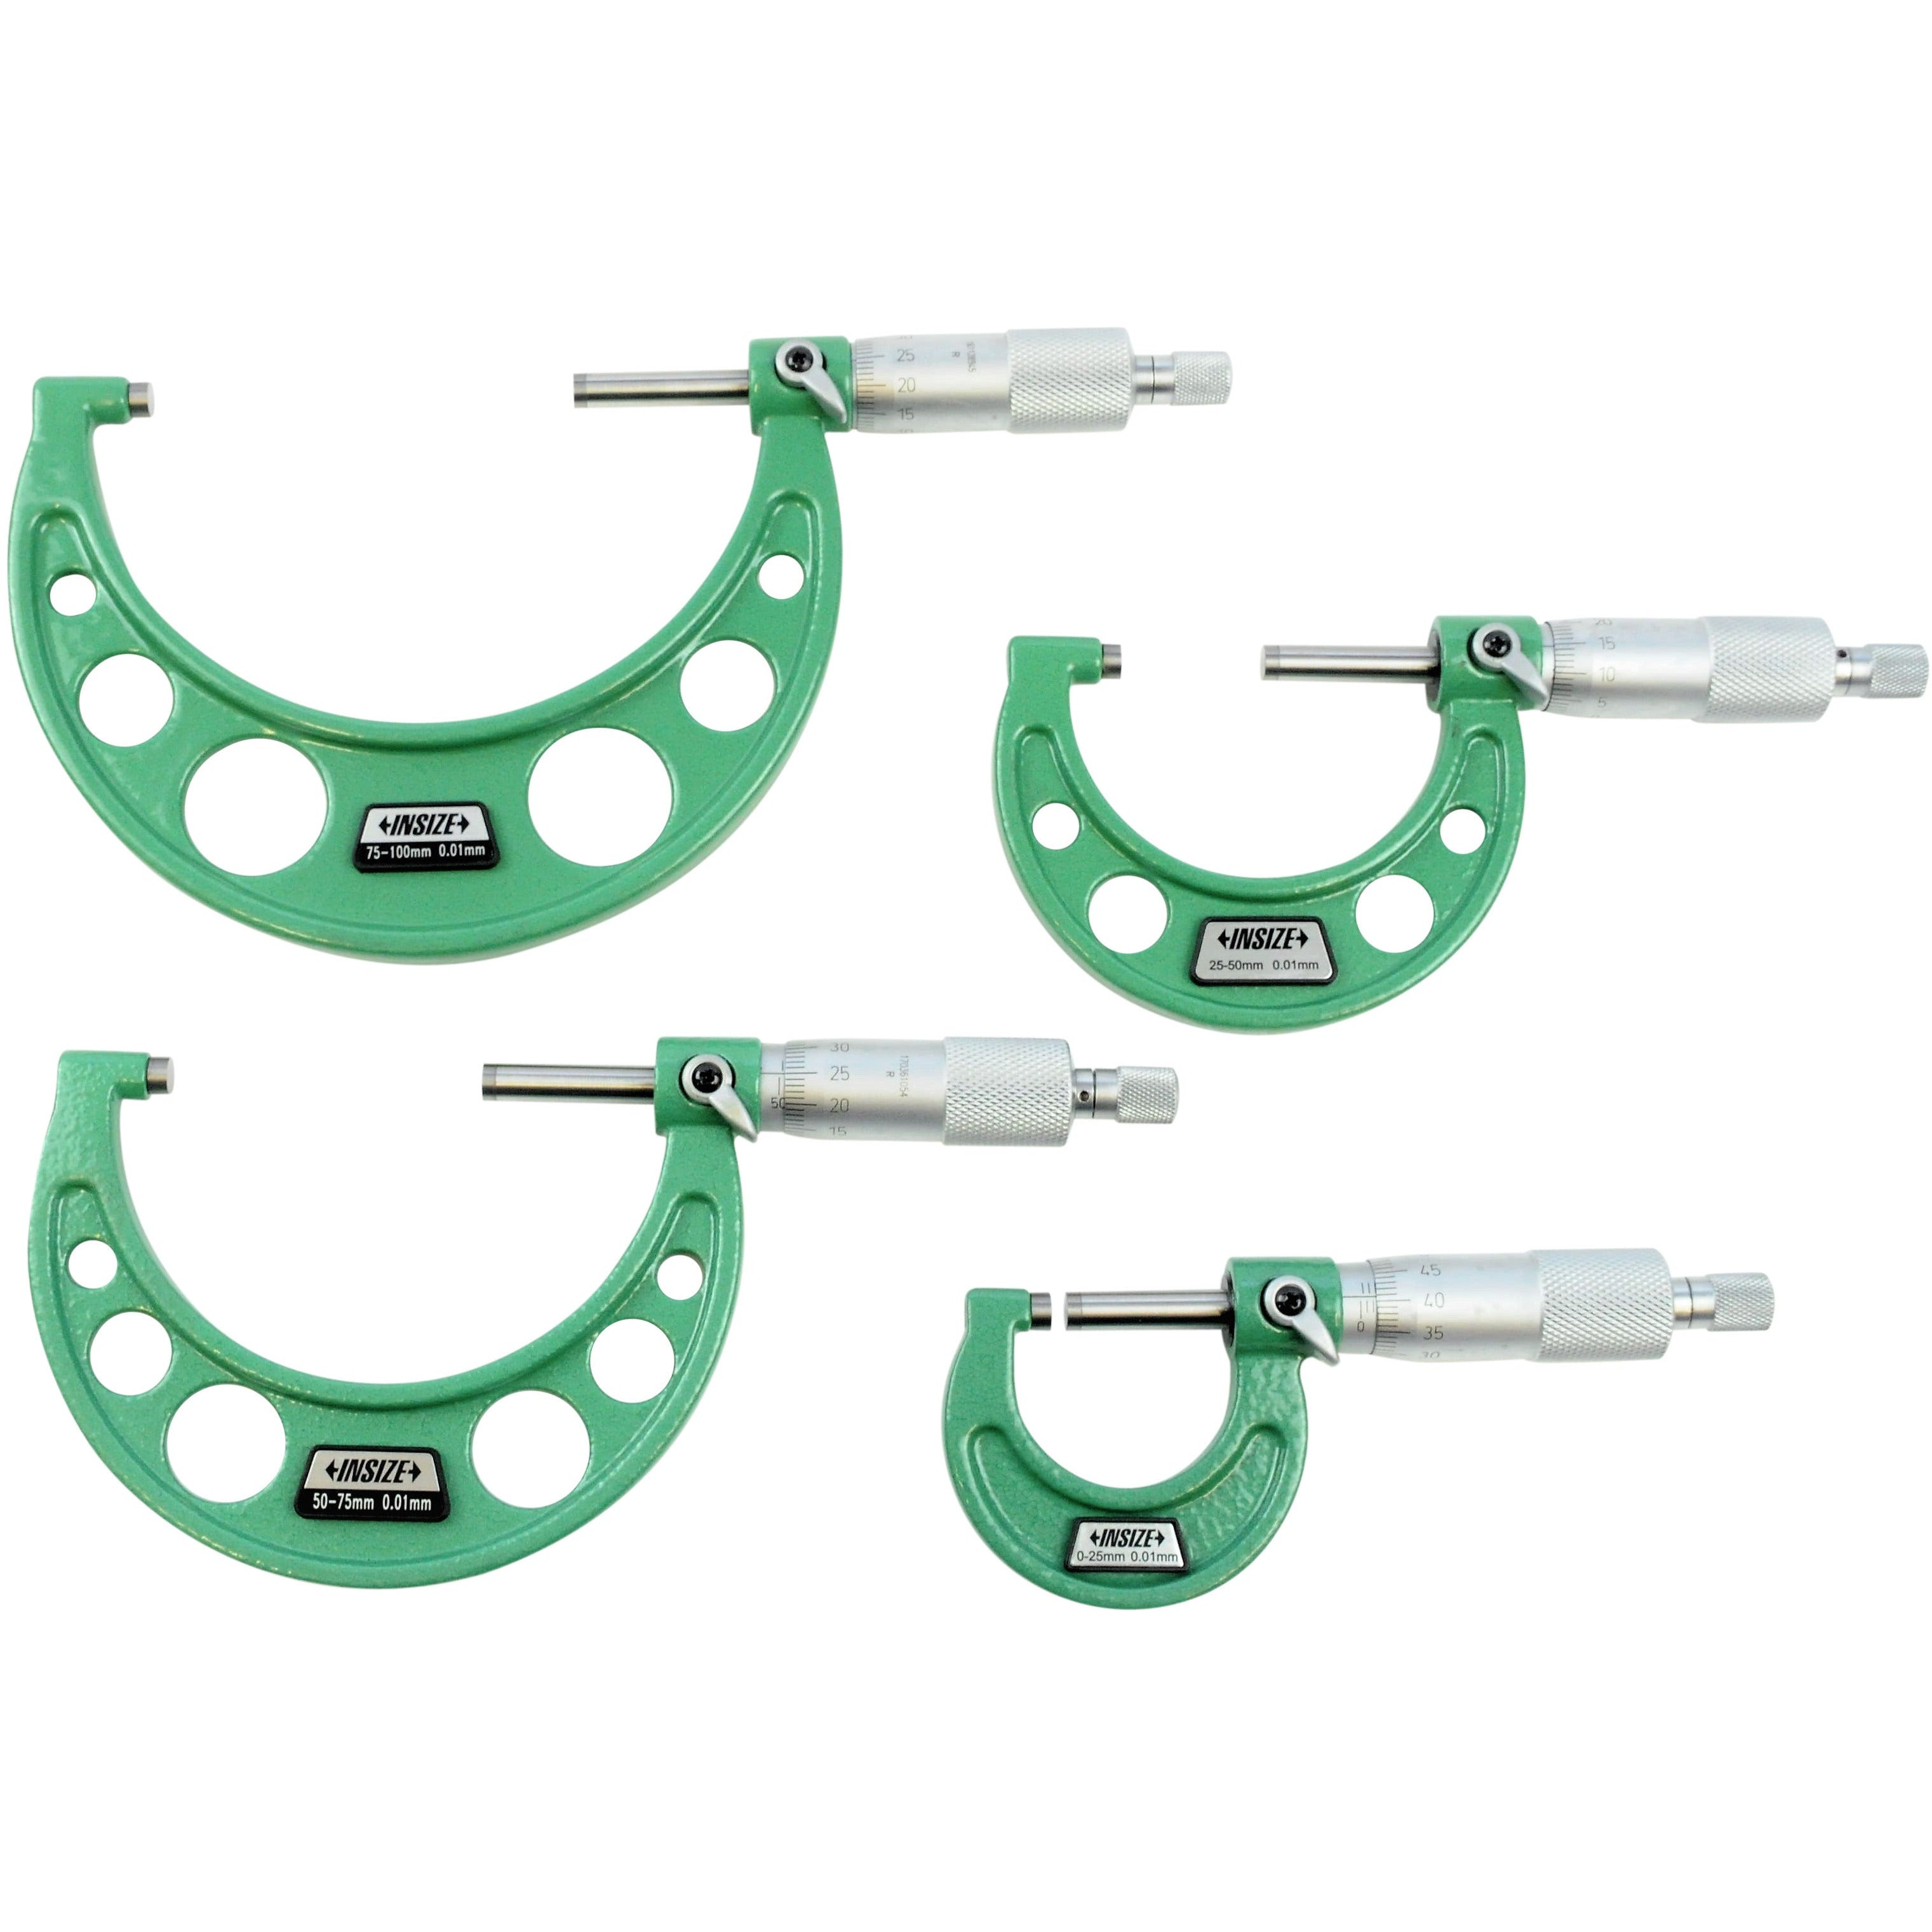 Insize Outside Micrometer Set 4 Piece Series  0-100mm Range Series 3203-1004A